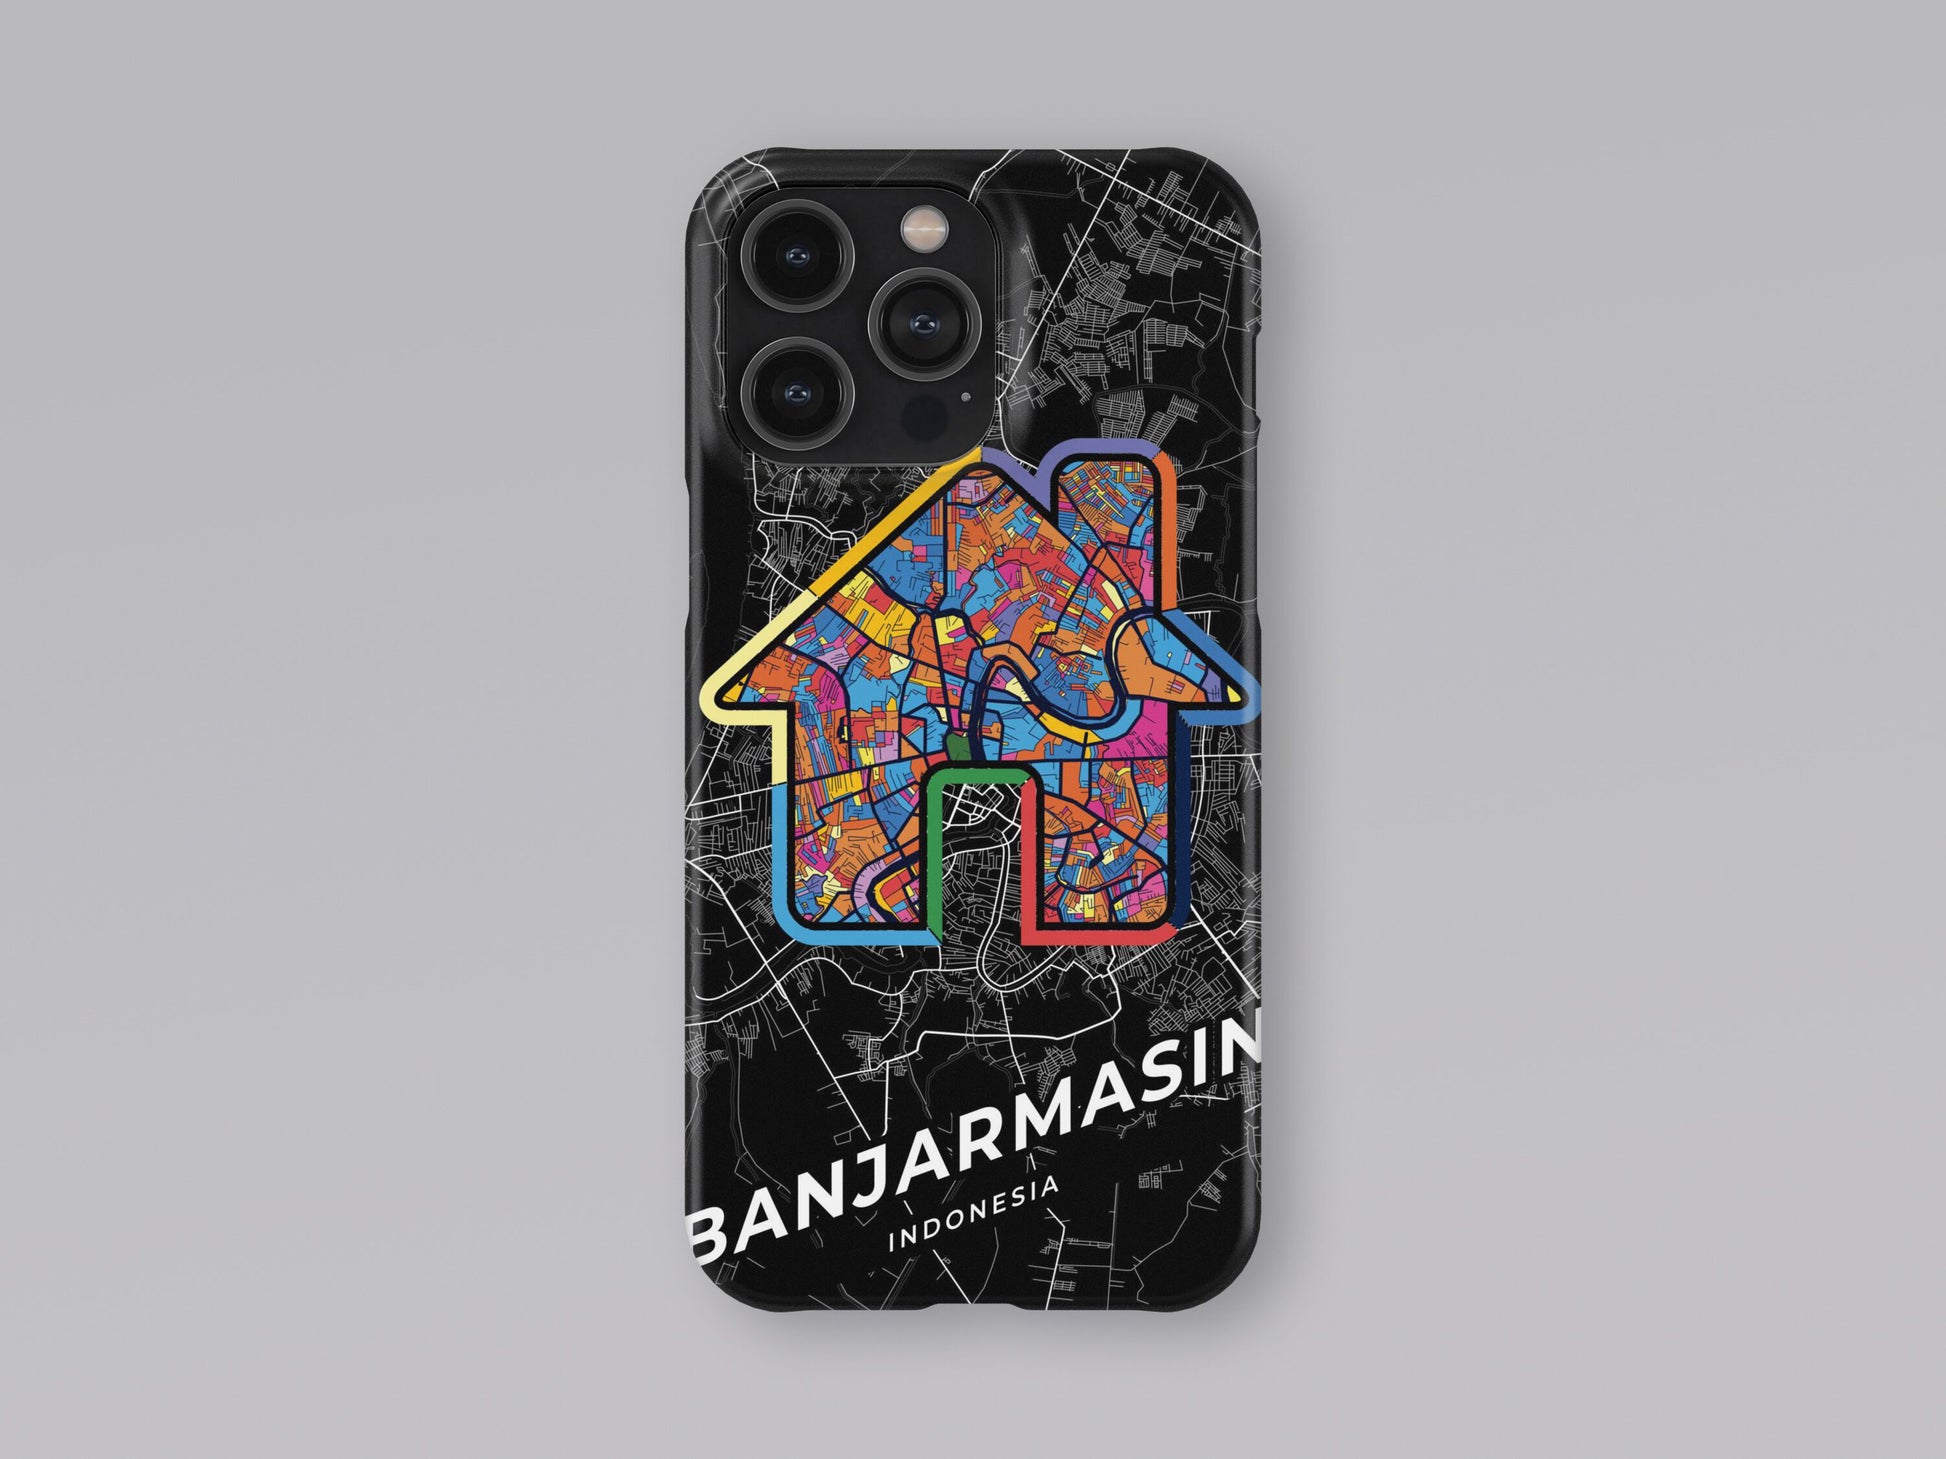 Banjarmasin Indonesia slim phone case with colorful icon. Birthday, wedding or housewarming gift. Couple match cases. 3